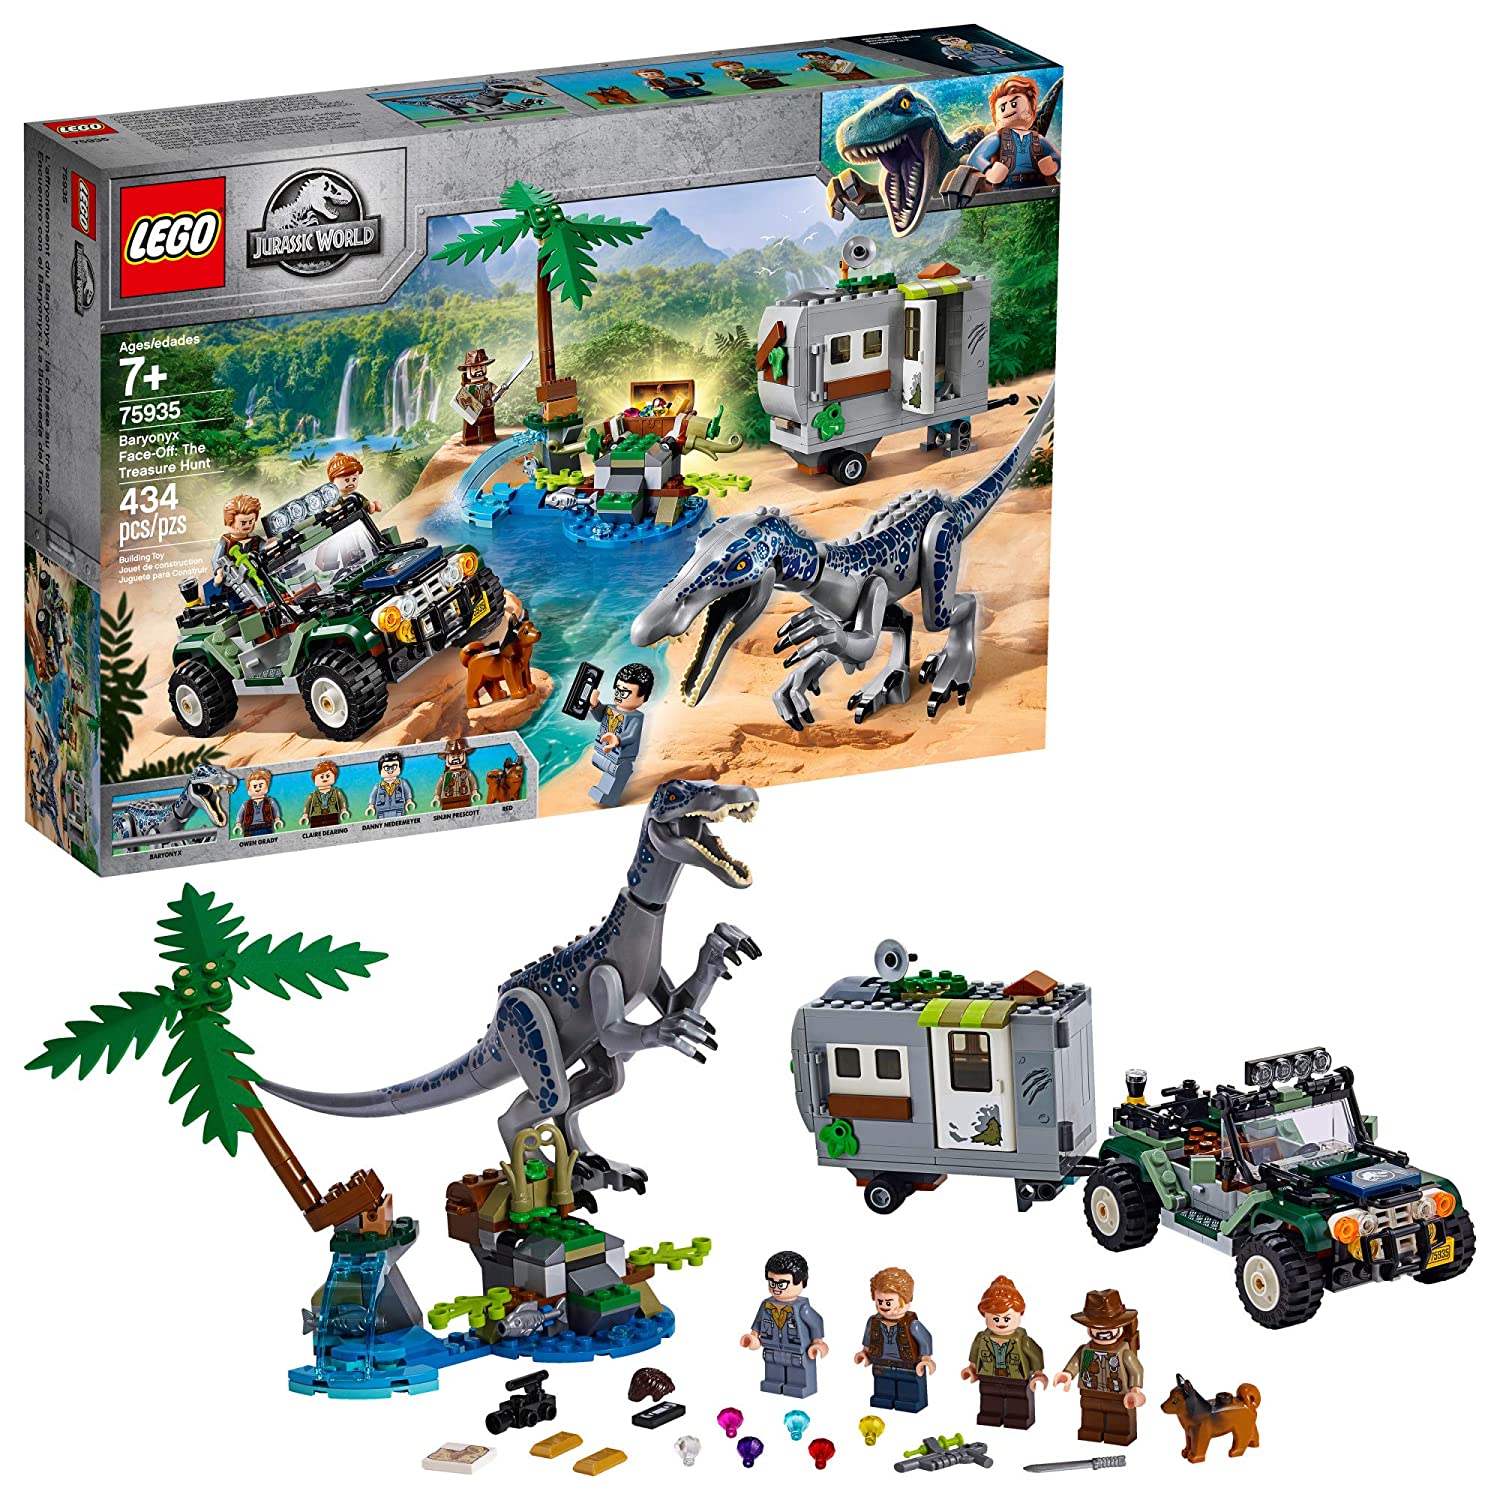 Top 8 Best Lego Dinosaurs Set Reviews in 2022 6